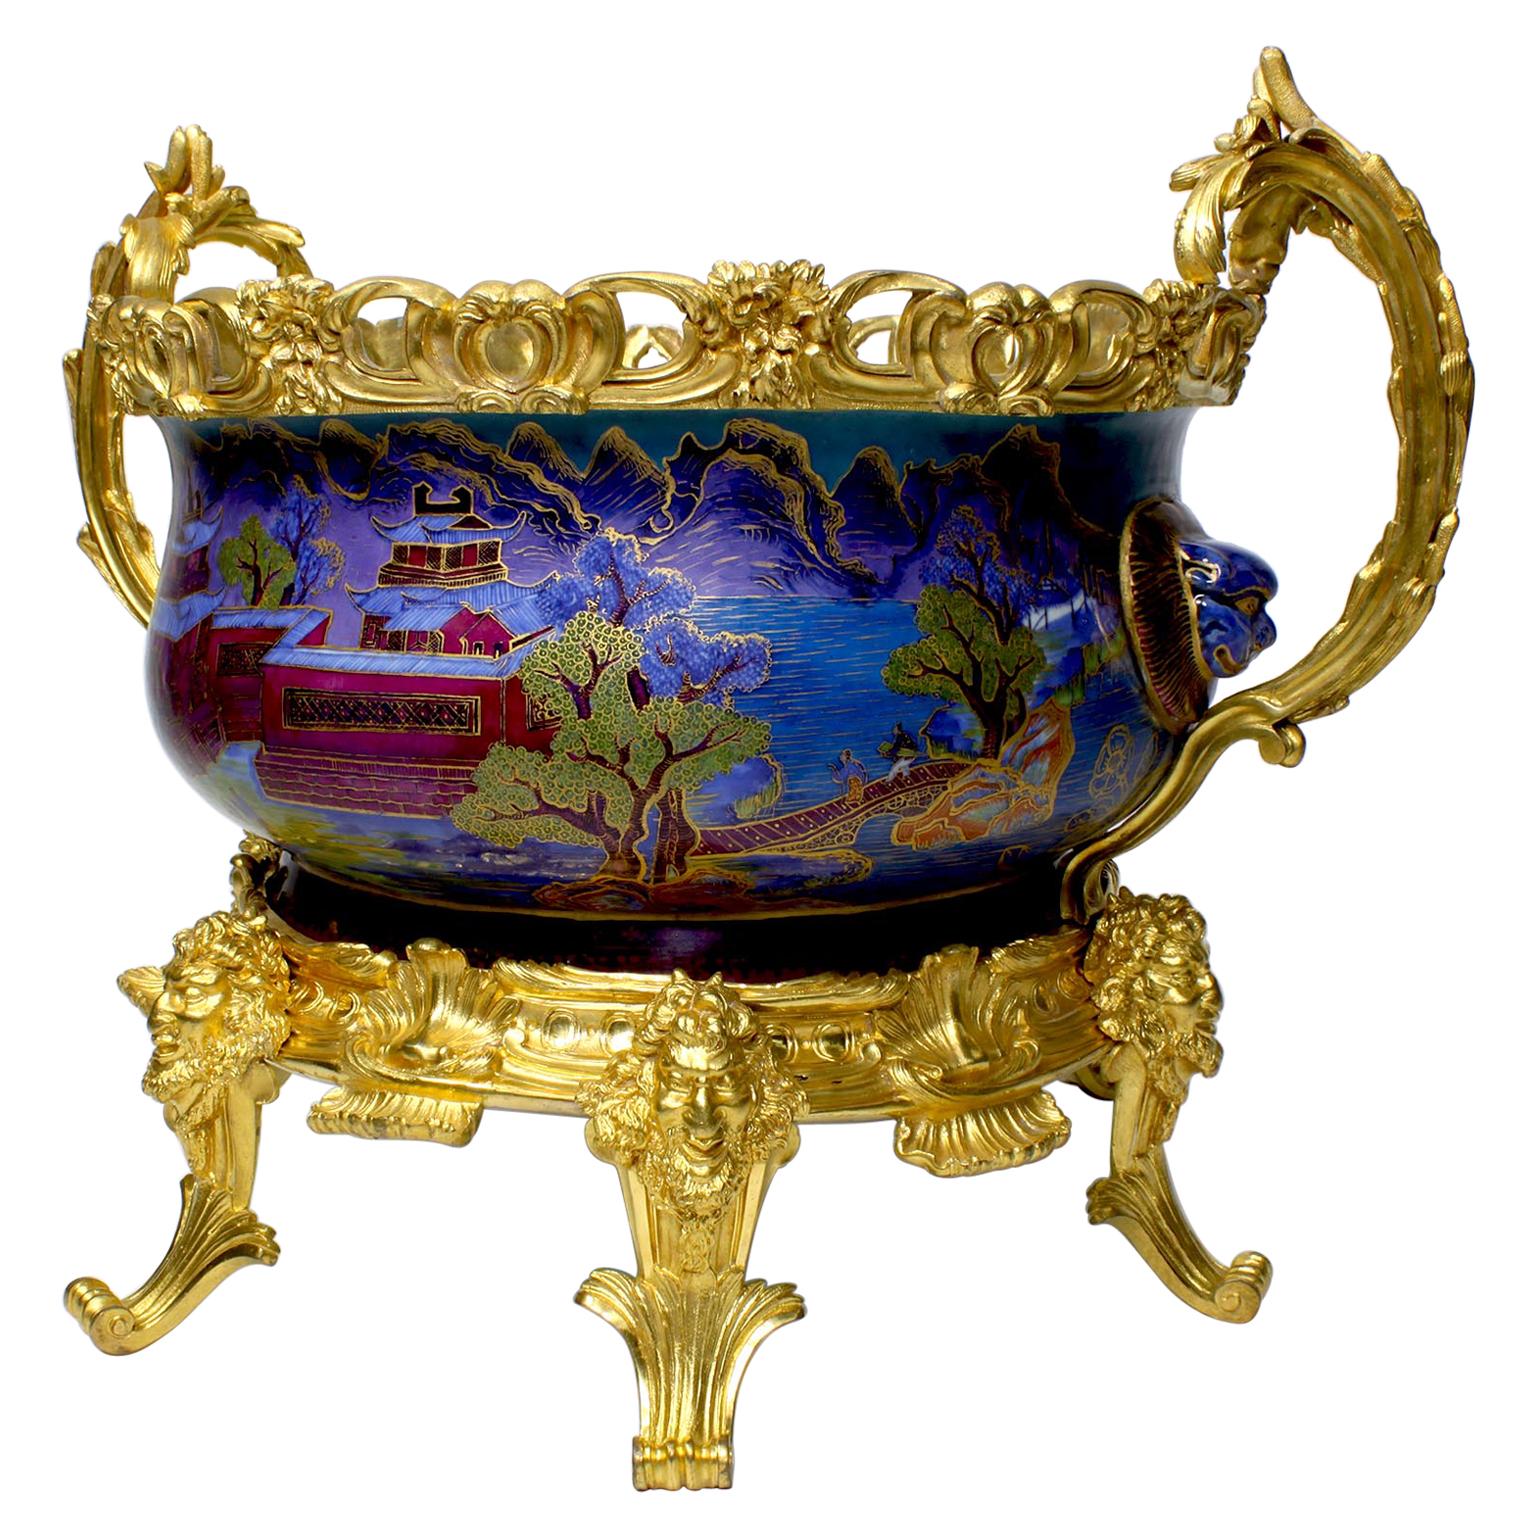 Chinese Export Famille Verte Porcelain & French Ormolu Chinoiserie Centerpiece For Sale